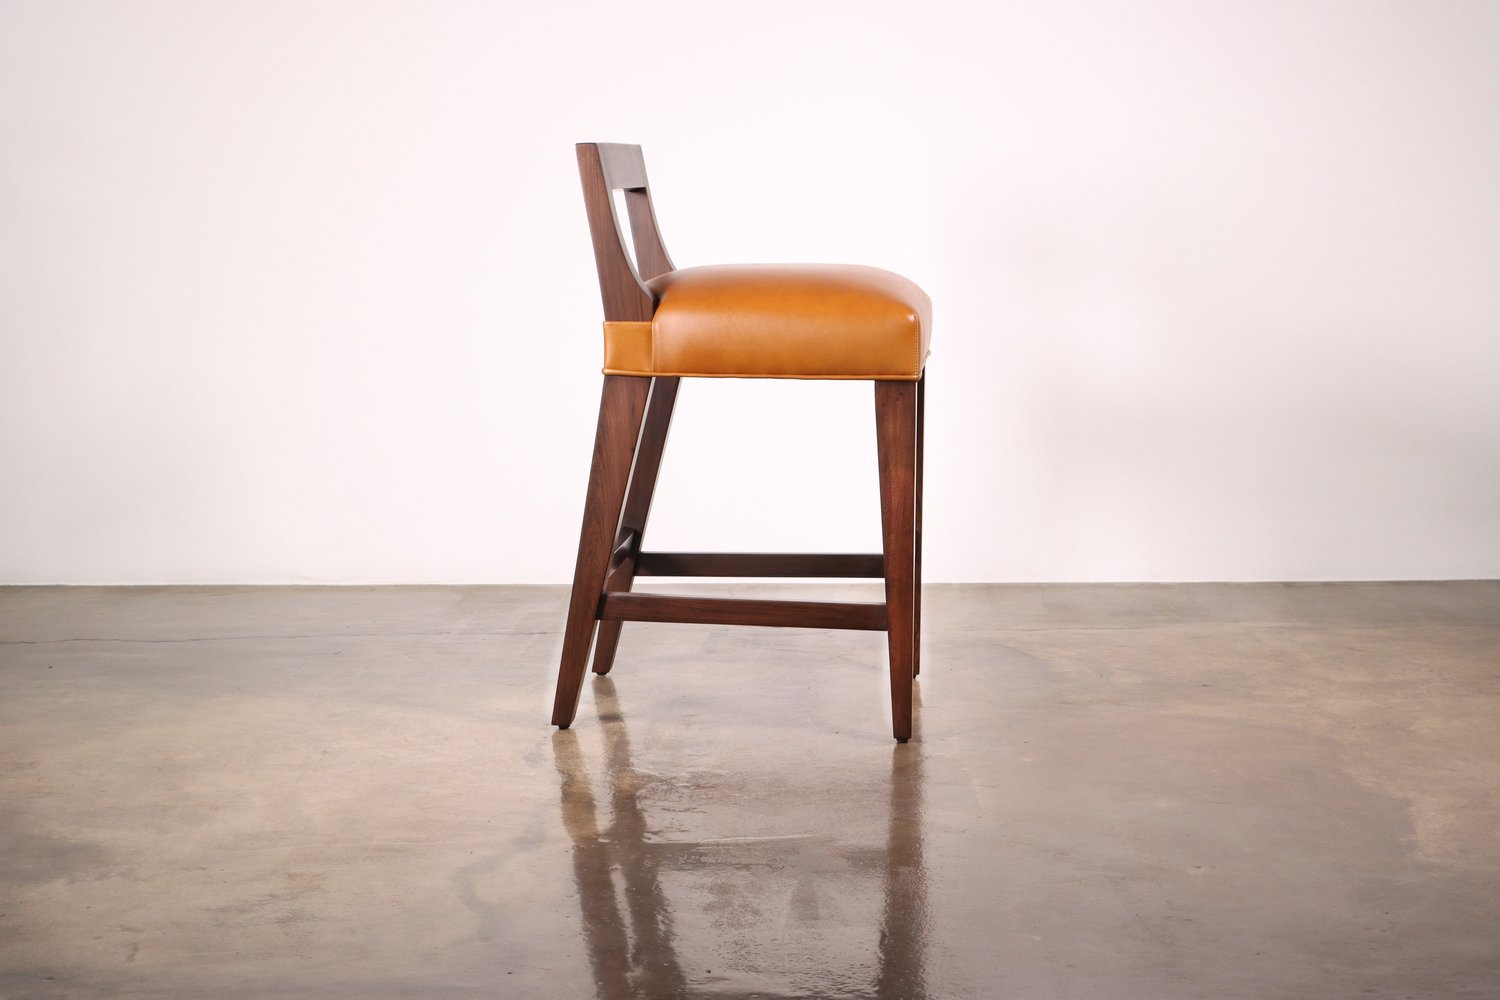 Wood Contemporary Stool in Leather by Costantini Design, Ecco — Costantini